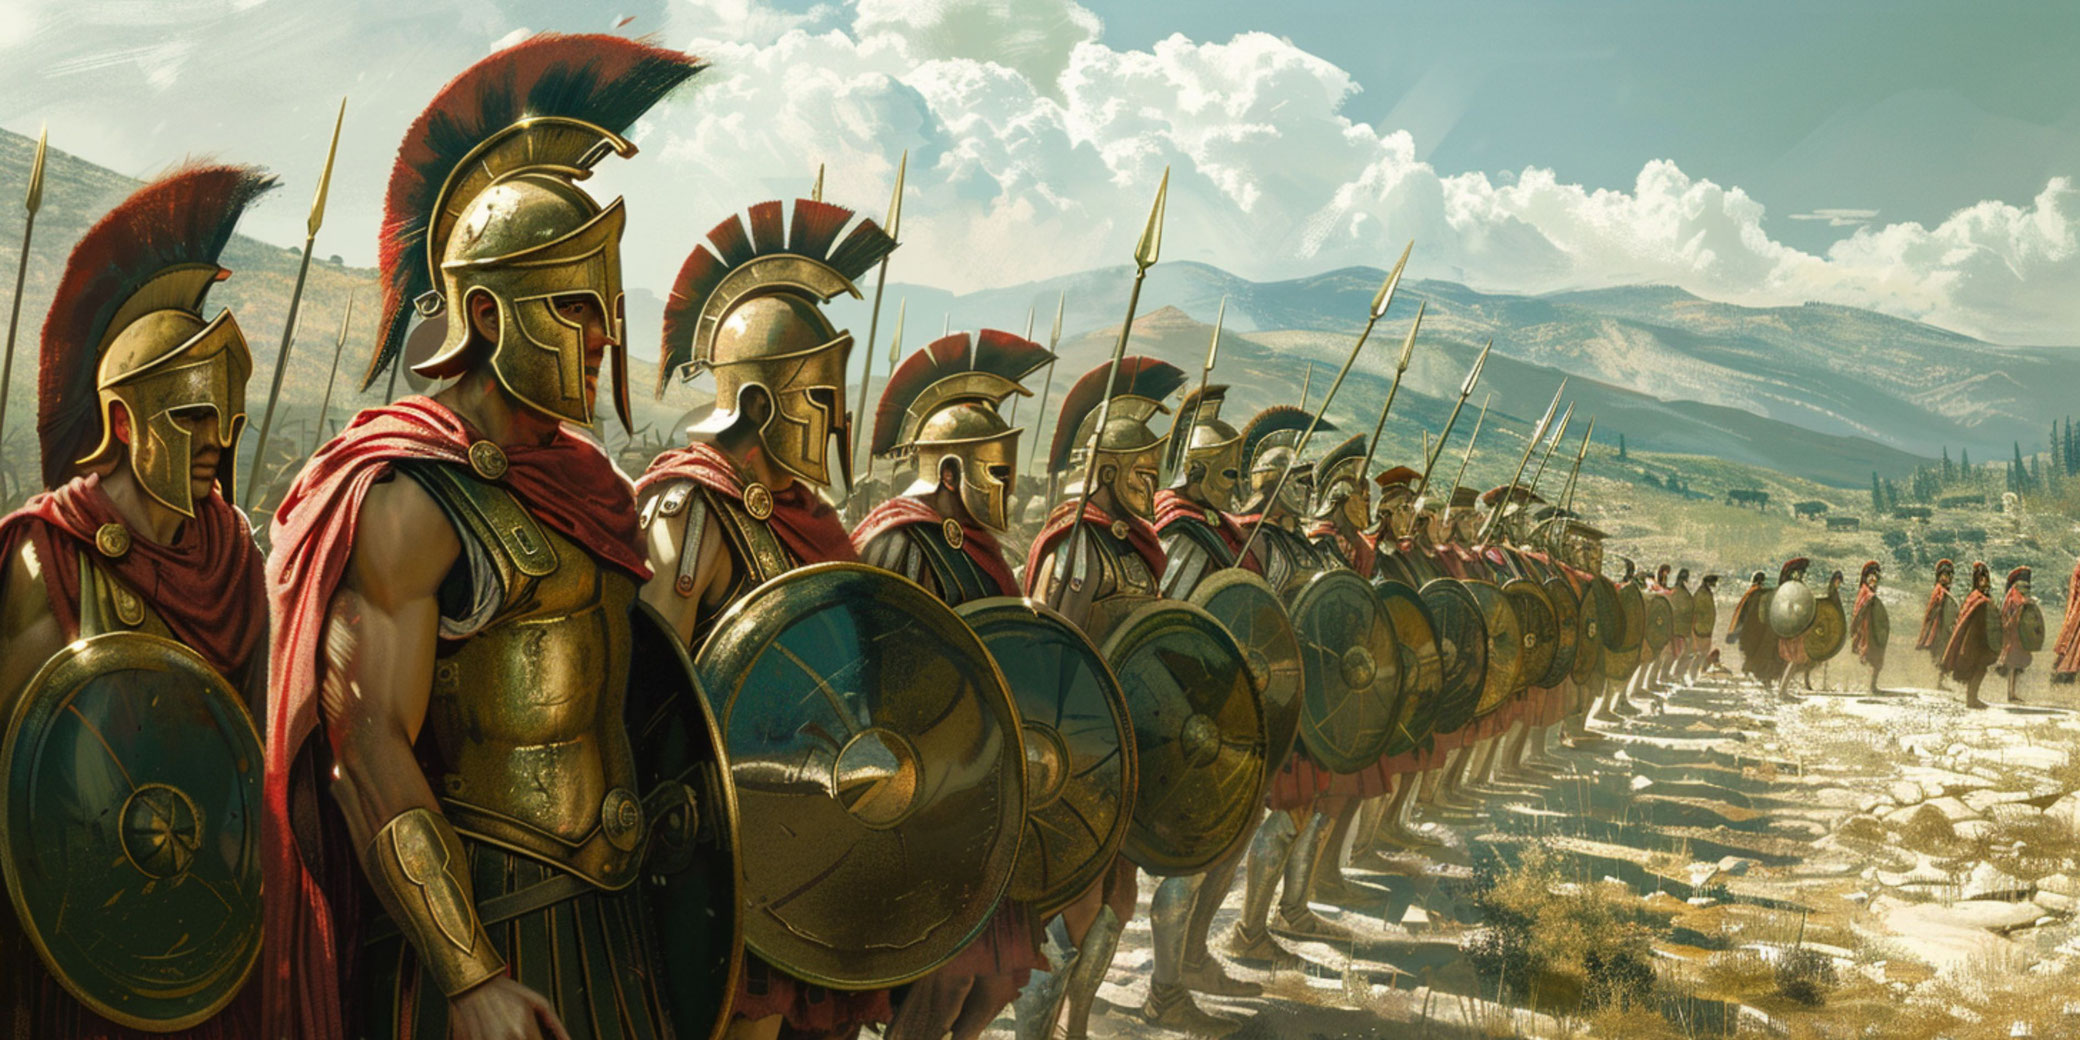 How the Battle of Chaeronea made Alexander the Great addicted to battlefield glory